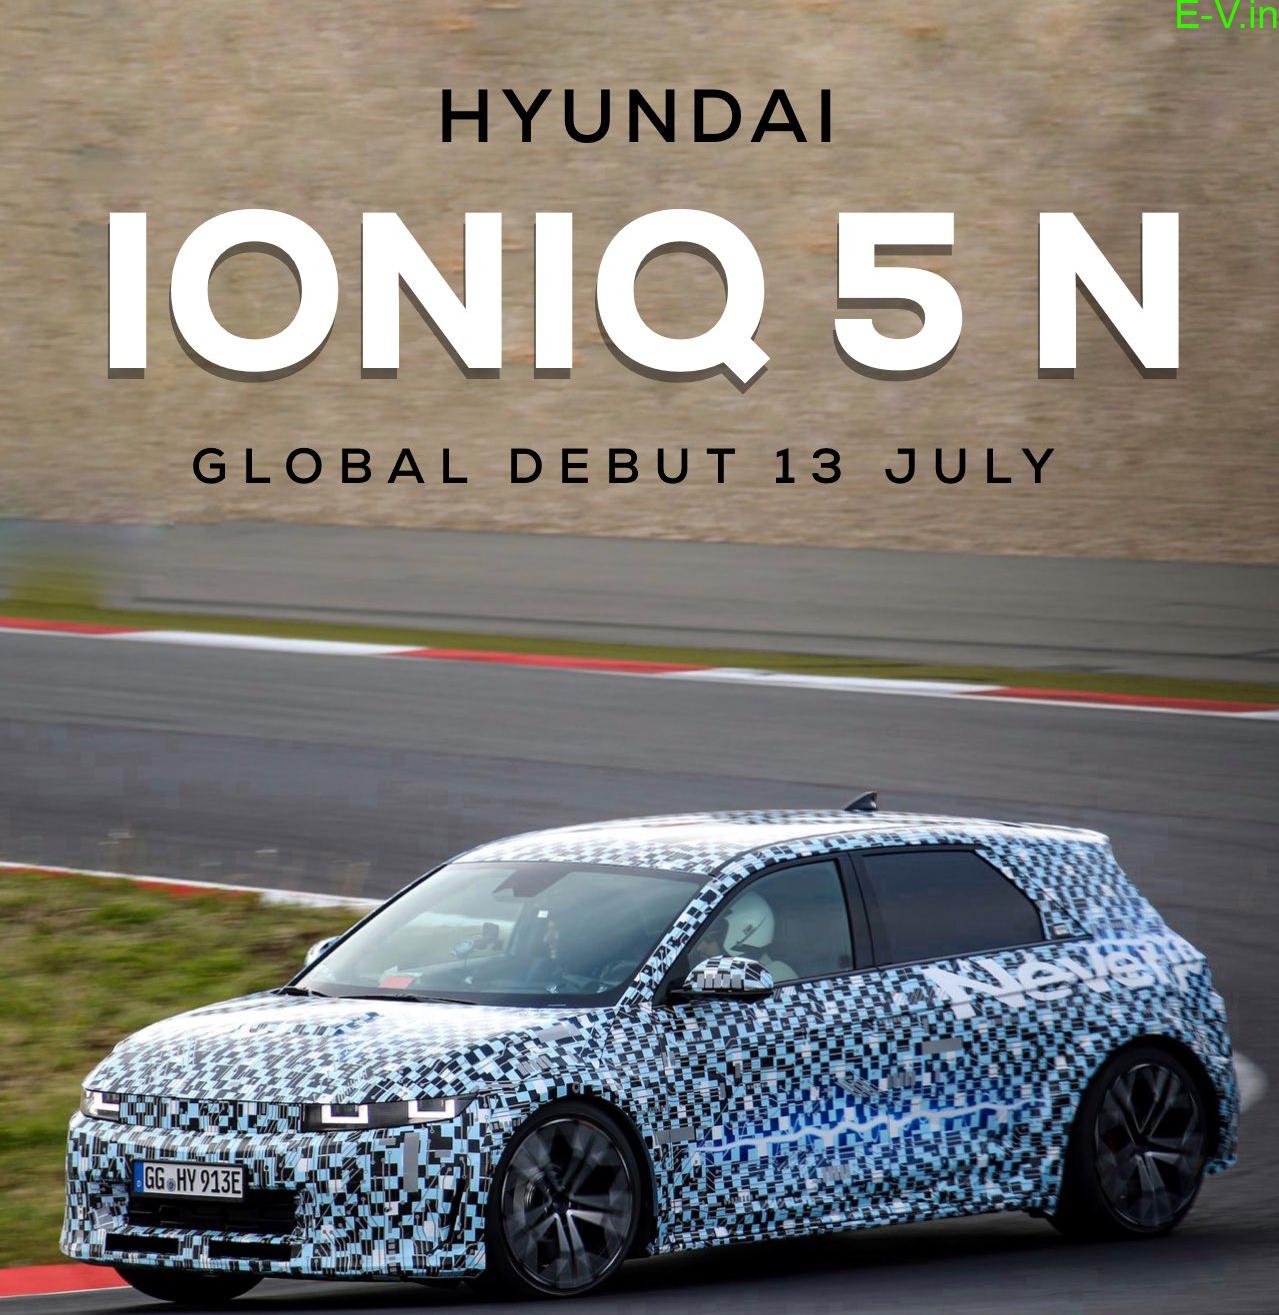 A final phase of testing of Hyundai Motor’s IONIQ 5 N is underway at Nurburgring